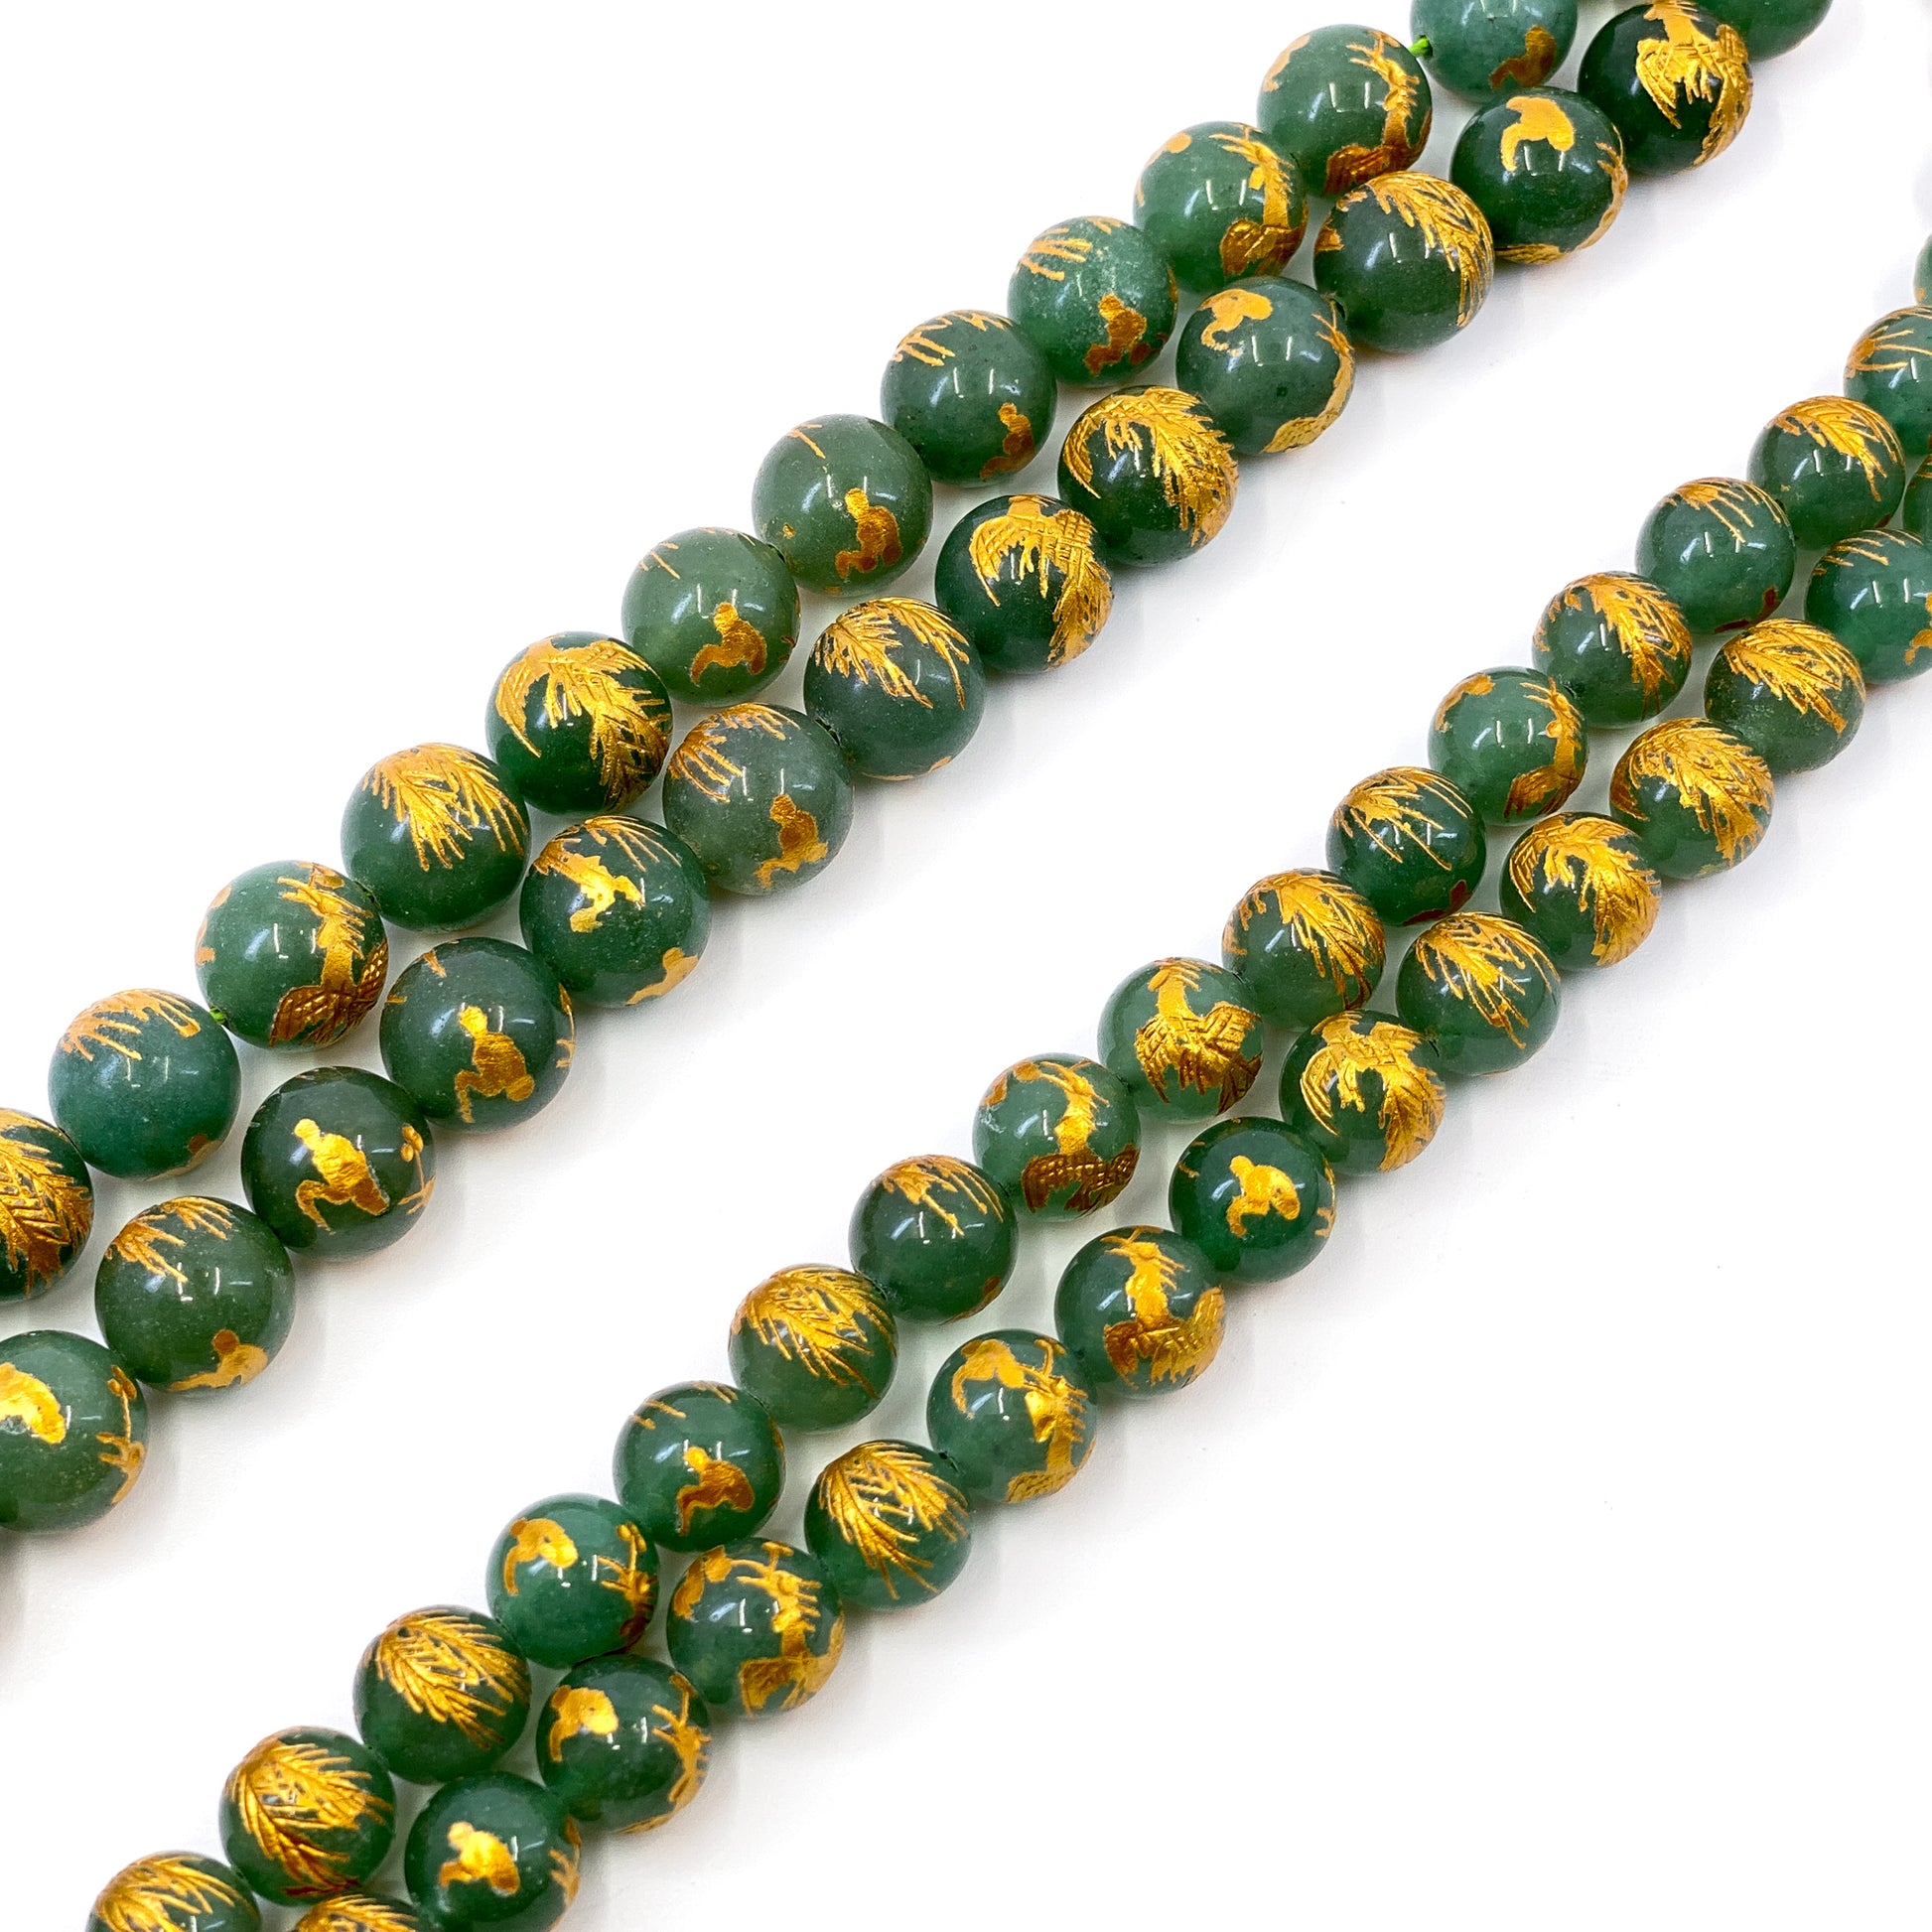 Gemstone with Etched Gold Phoenix 10mm Round Bead (7 Options Available) - 7.5" Strand